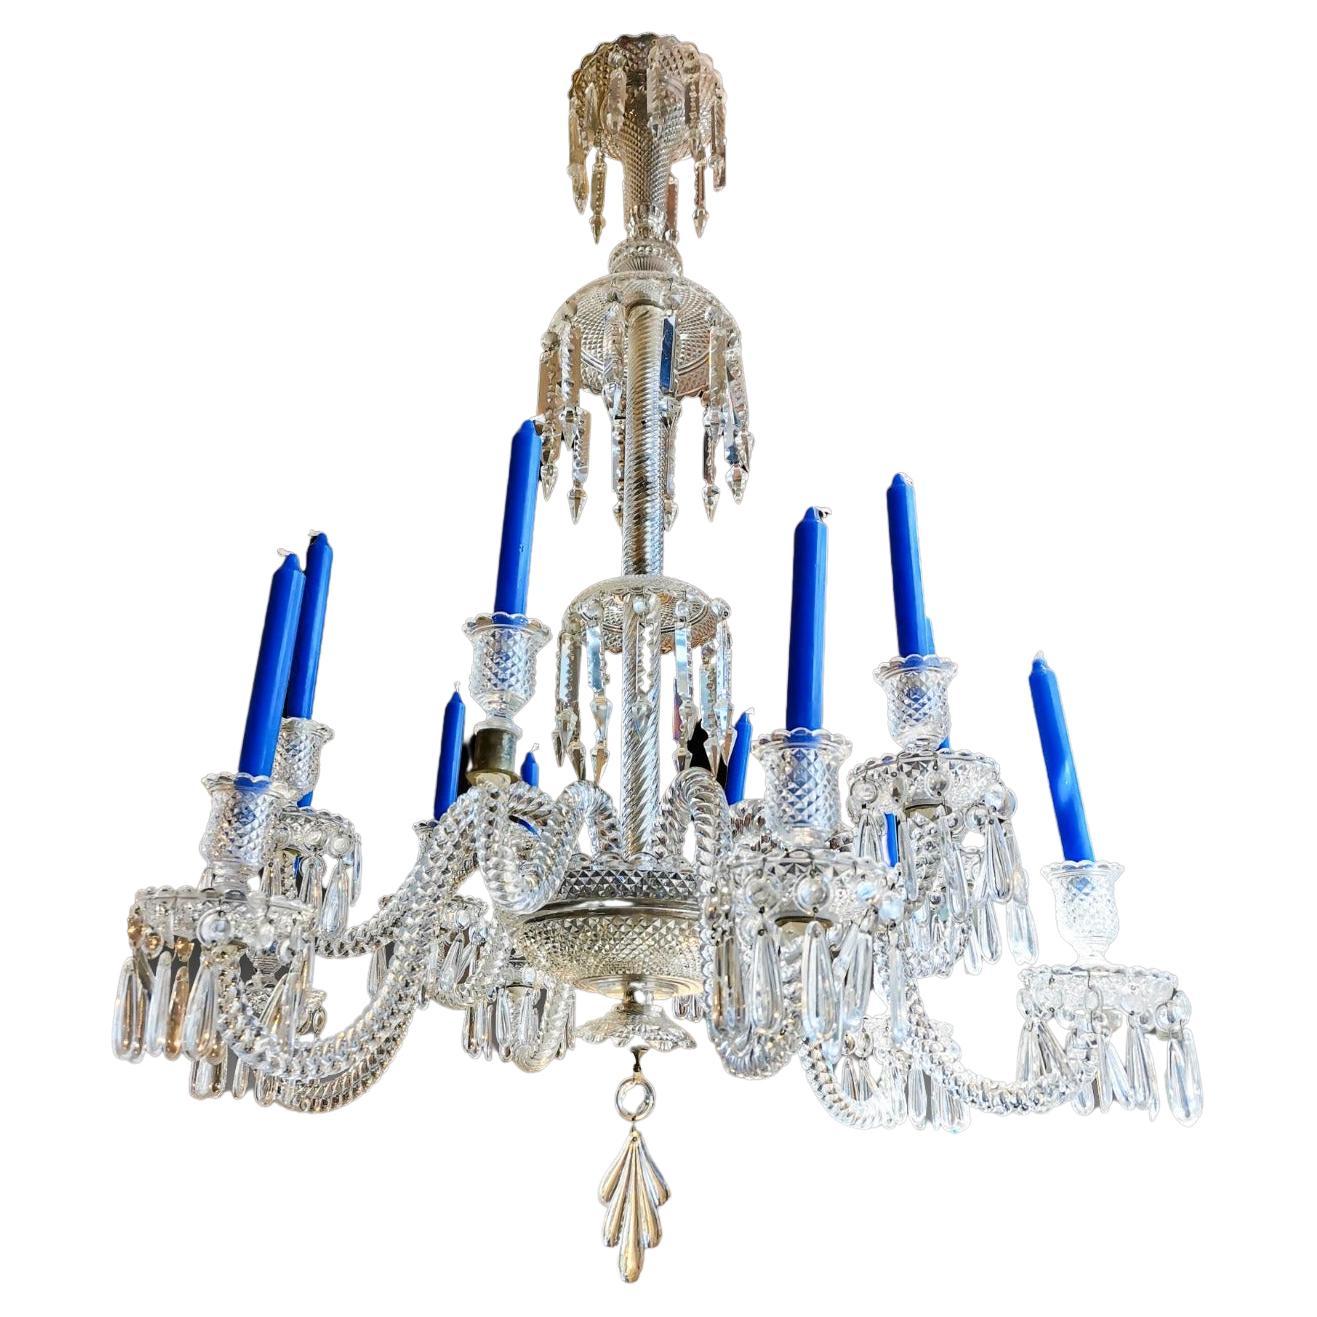 Crystal Chandelier Baccarat with 12 Arms Finely Decorated with Pearls, 19th Cen